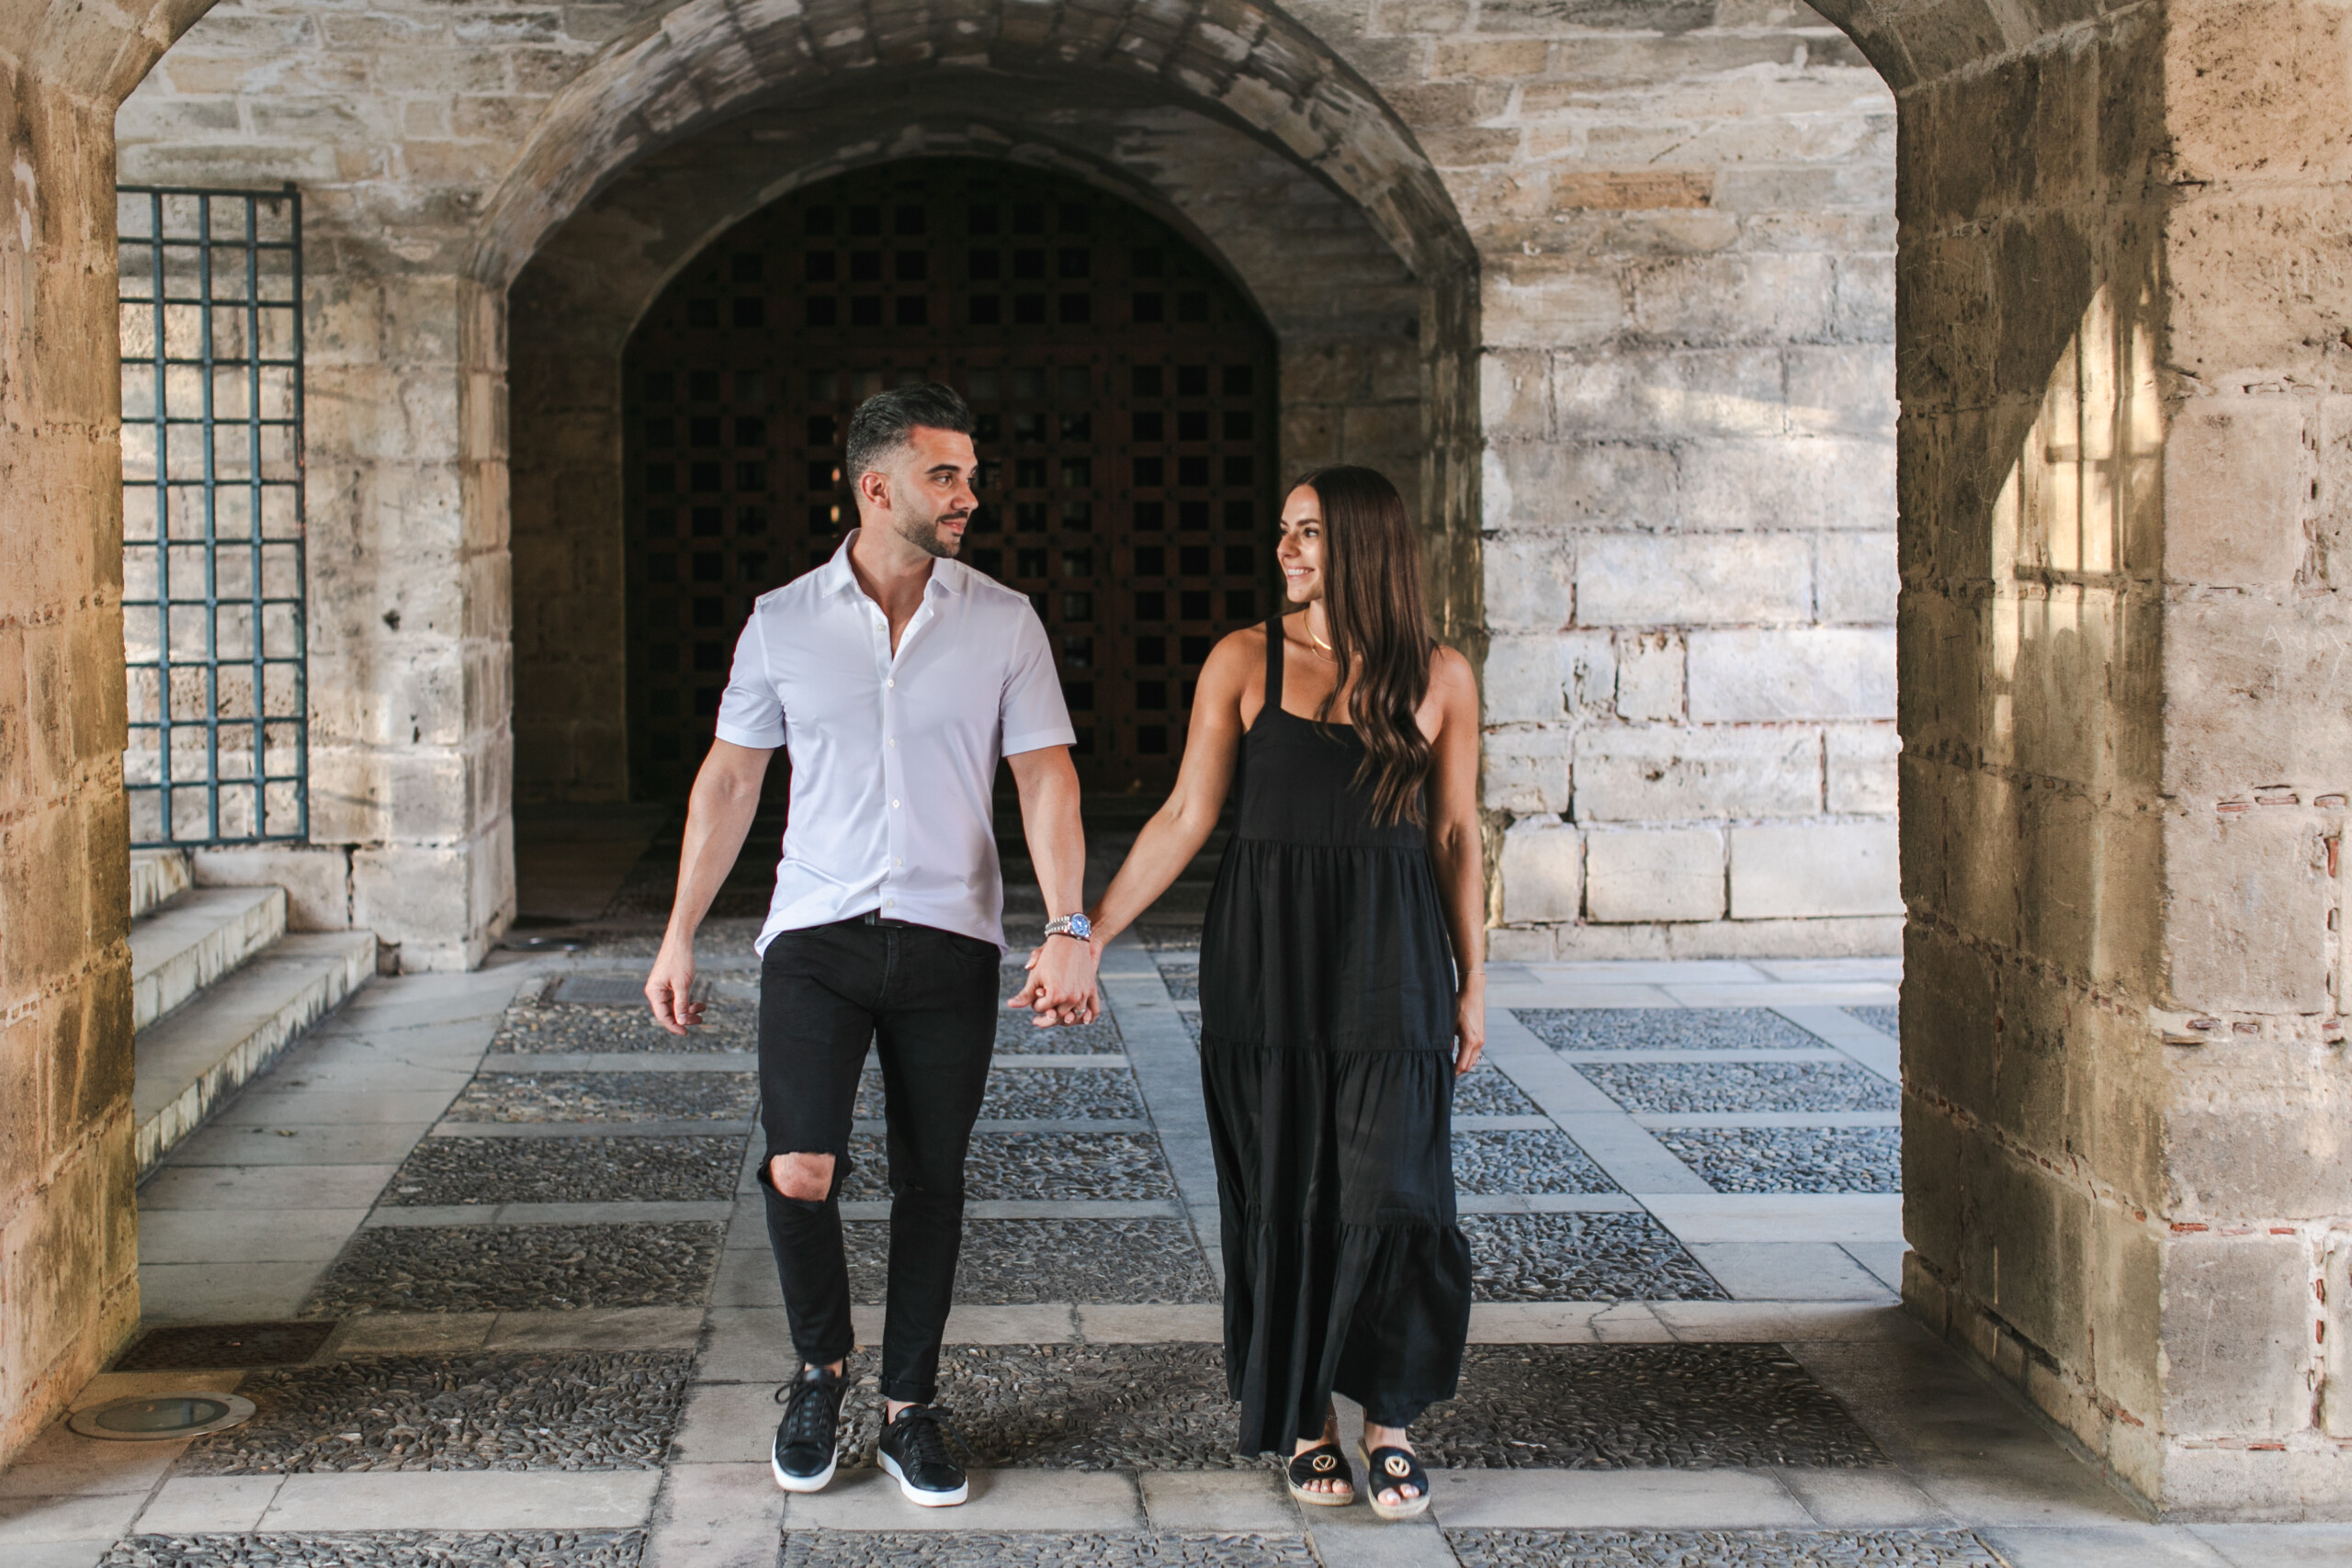 Engagement photoshoot by Danielle, Localgrapher in Mallorca